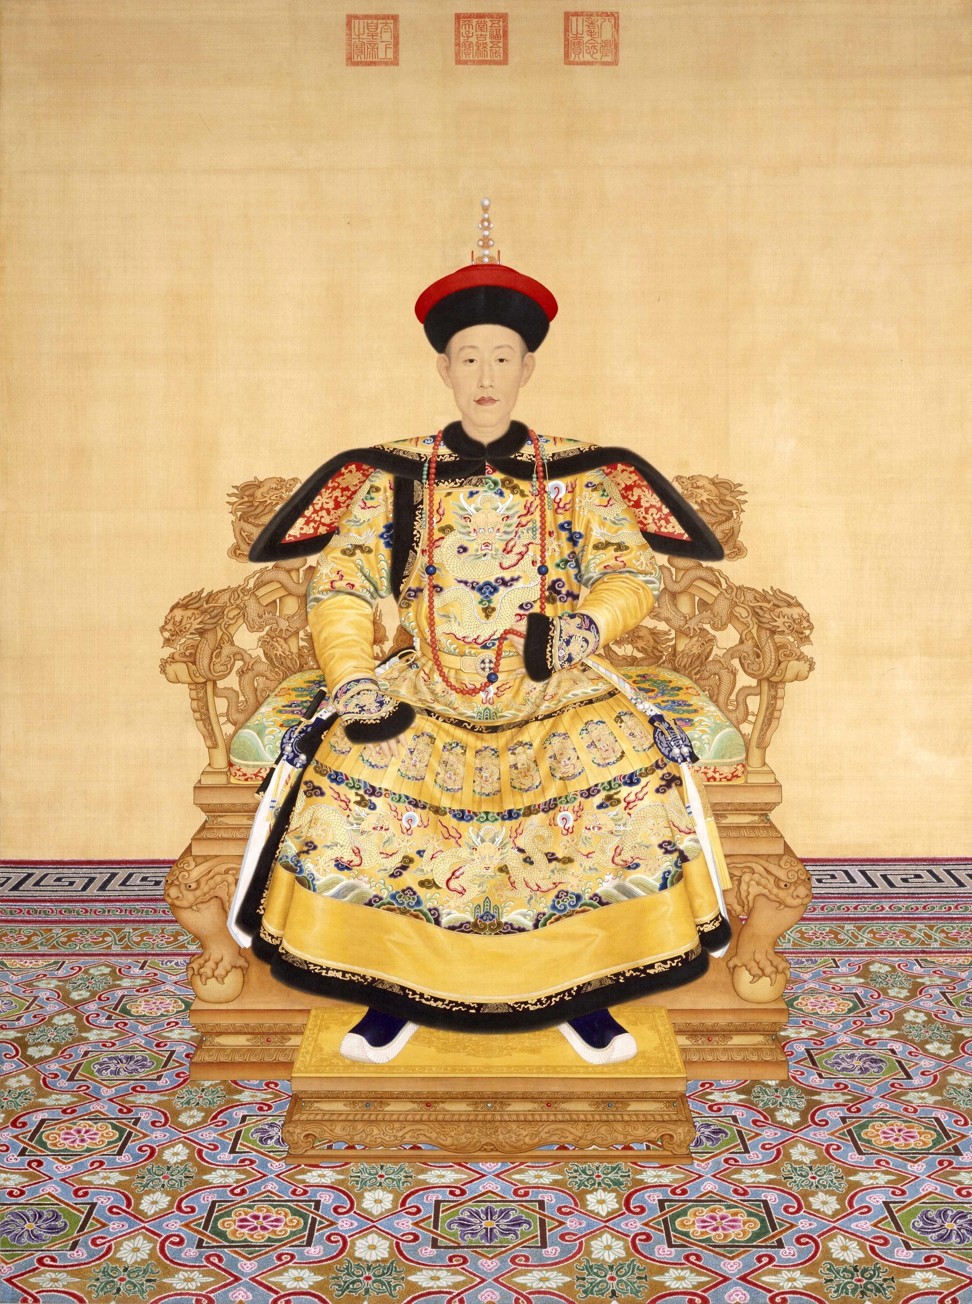 A painting of the Qianlong emperor, under whose rule attitudes towards European merchants changed.